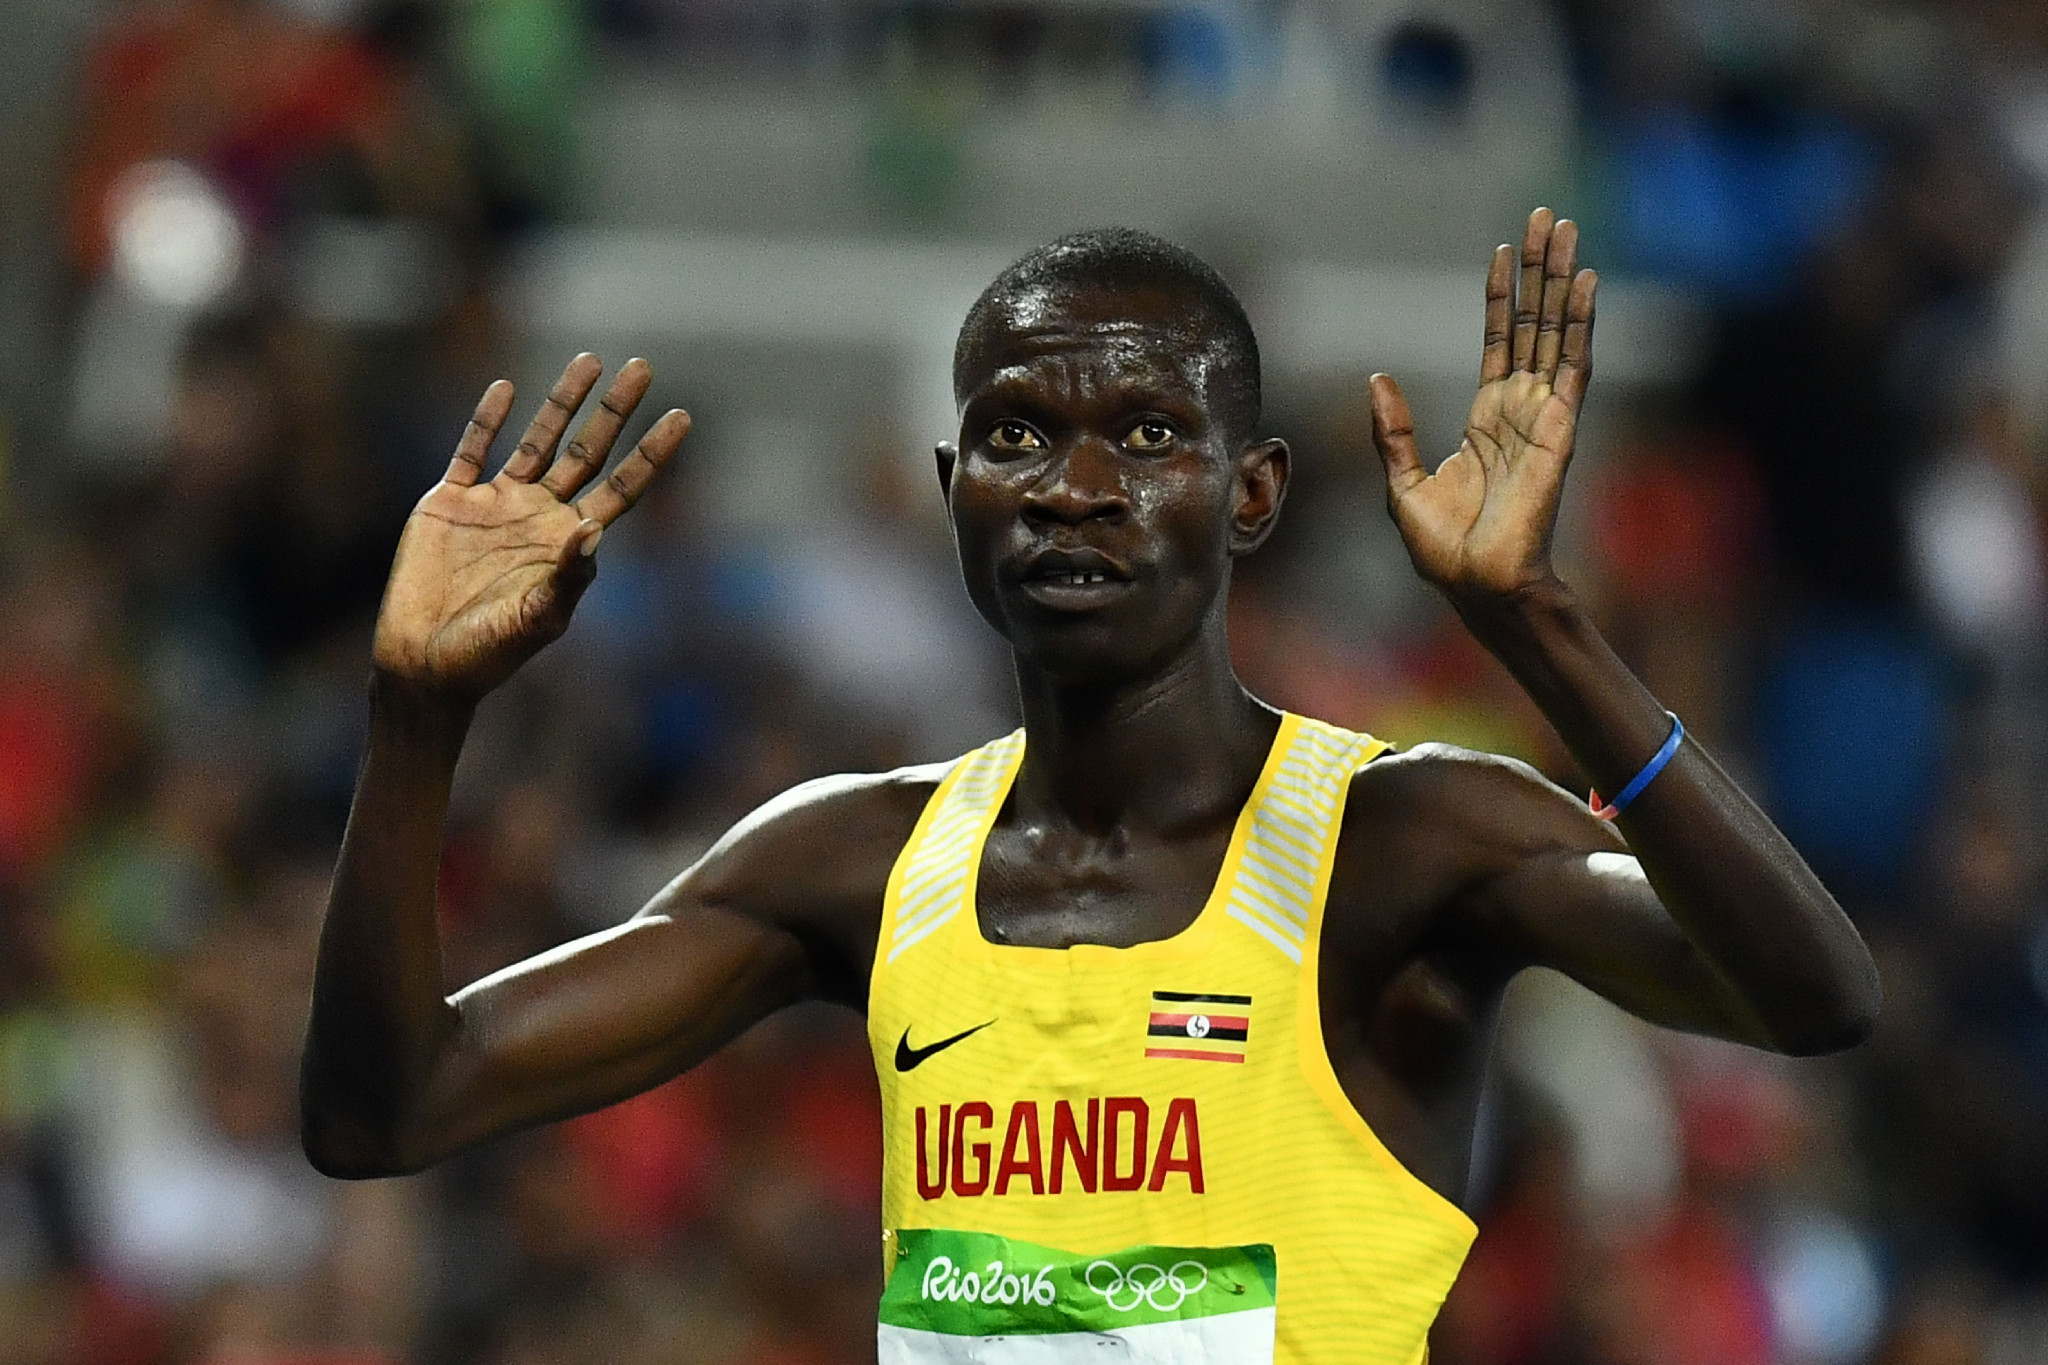 The aim of the project is to install Olympic values into Ugandan athletes from a young age ©Getty Images